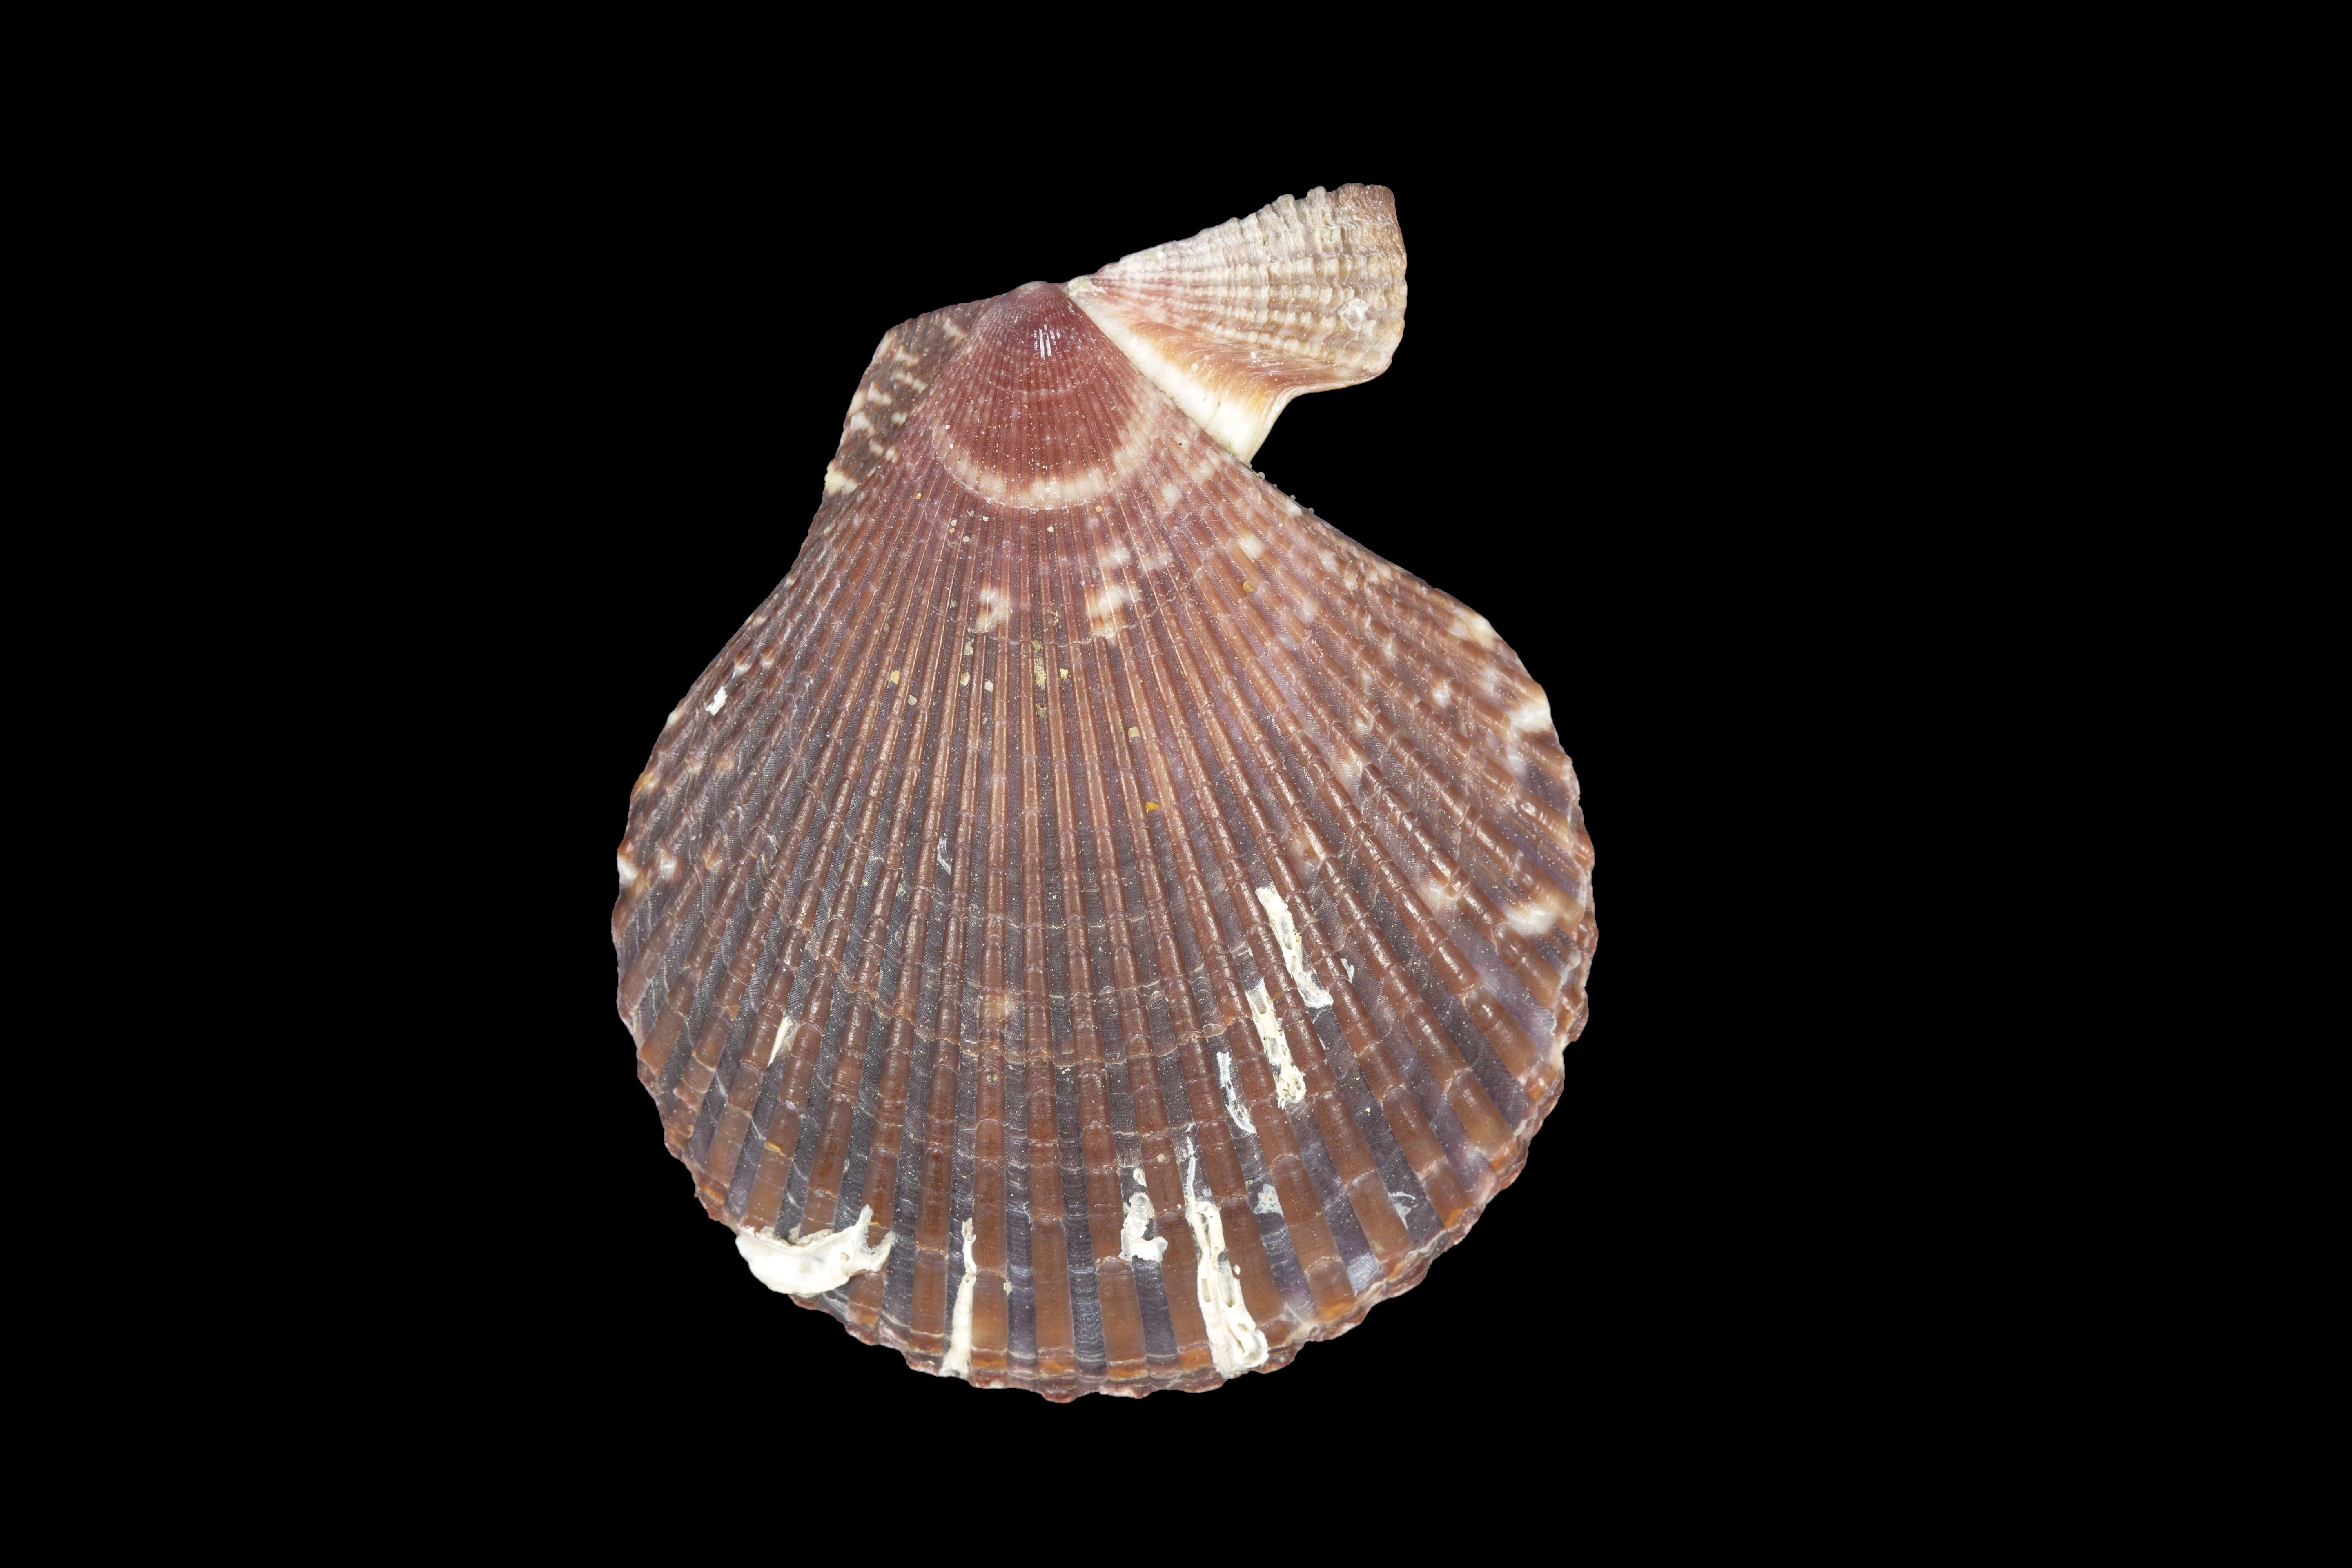 Image of Chlamys varia